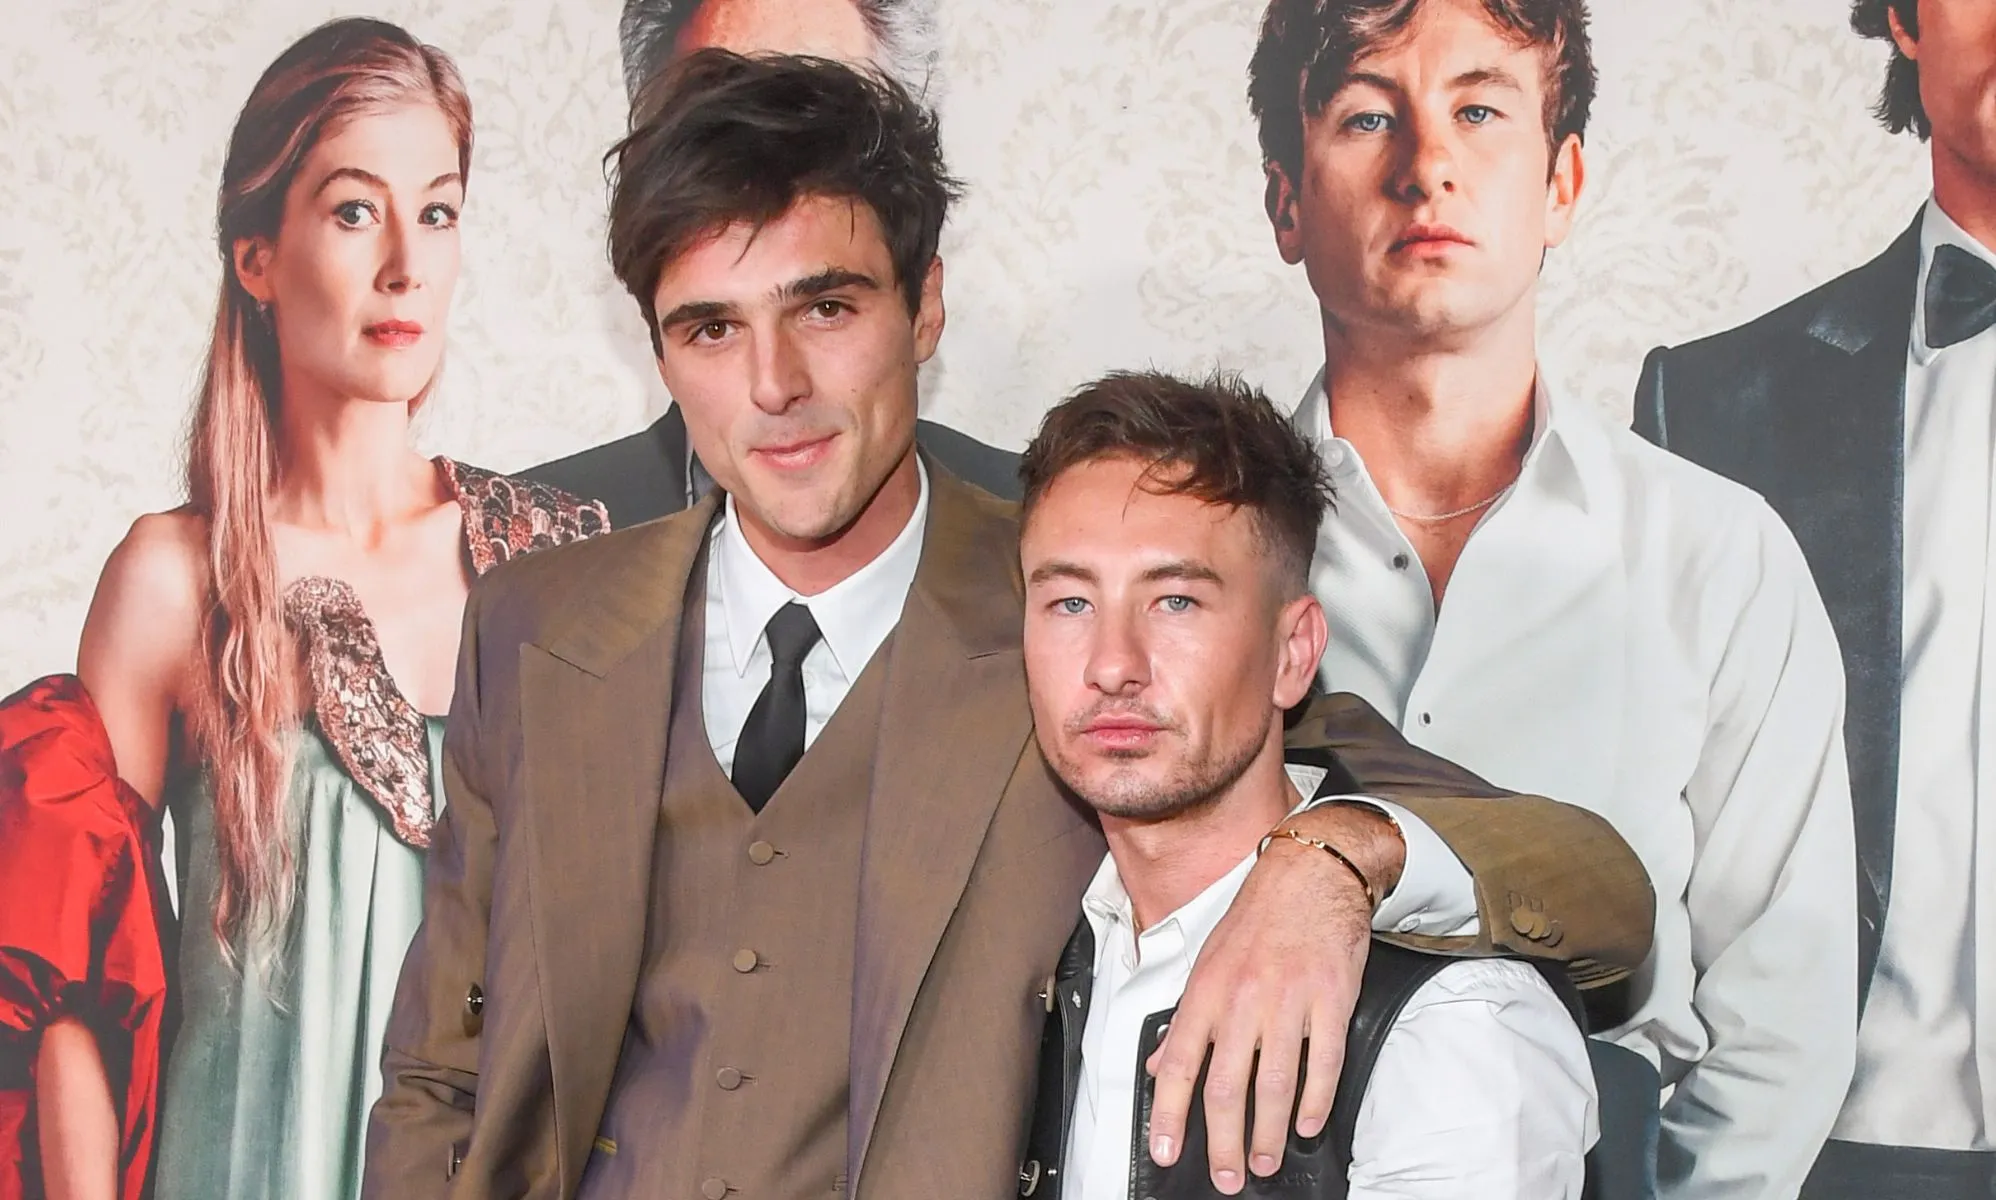 Jacob Elordi And Barry Keoghan Lean In For Kiss At Saltburn Premiere-TGN